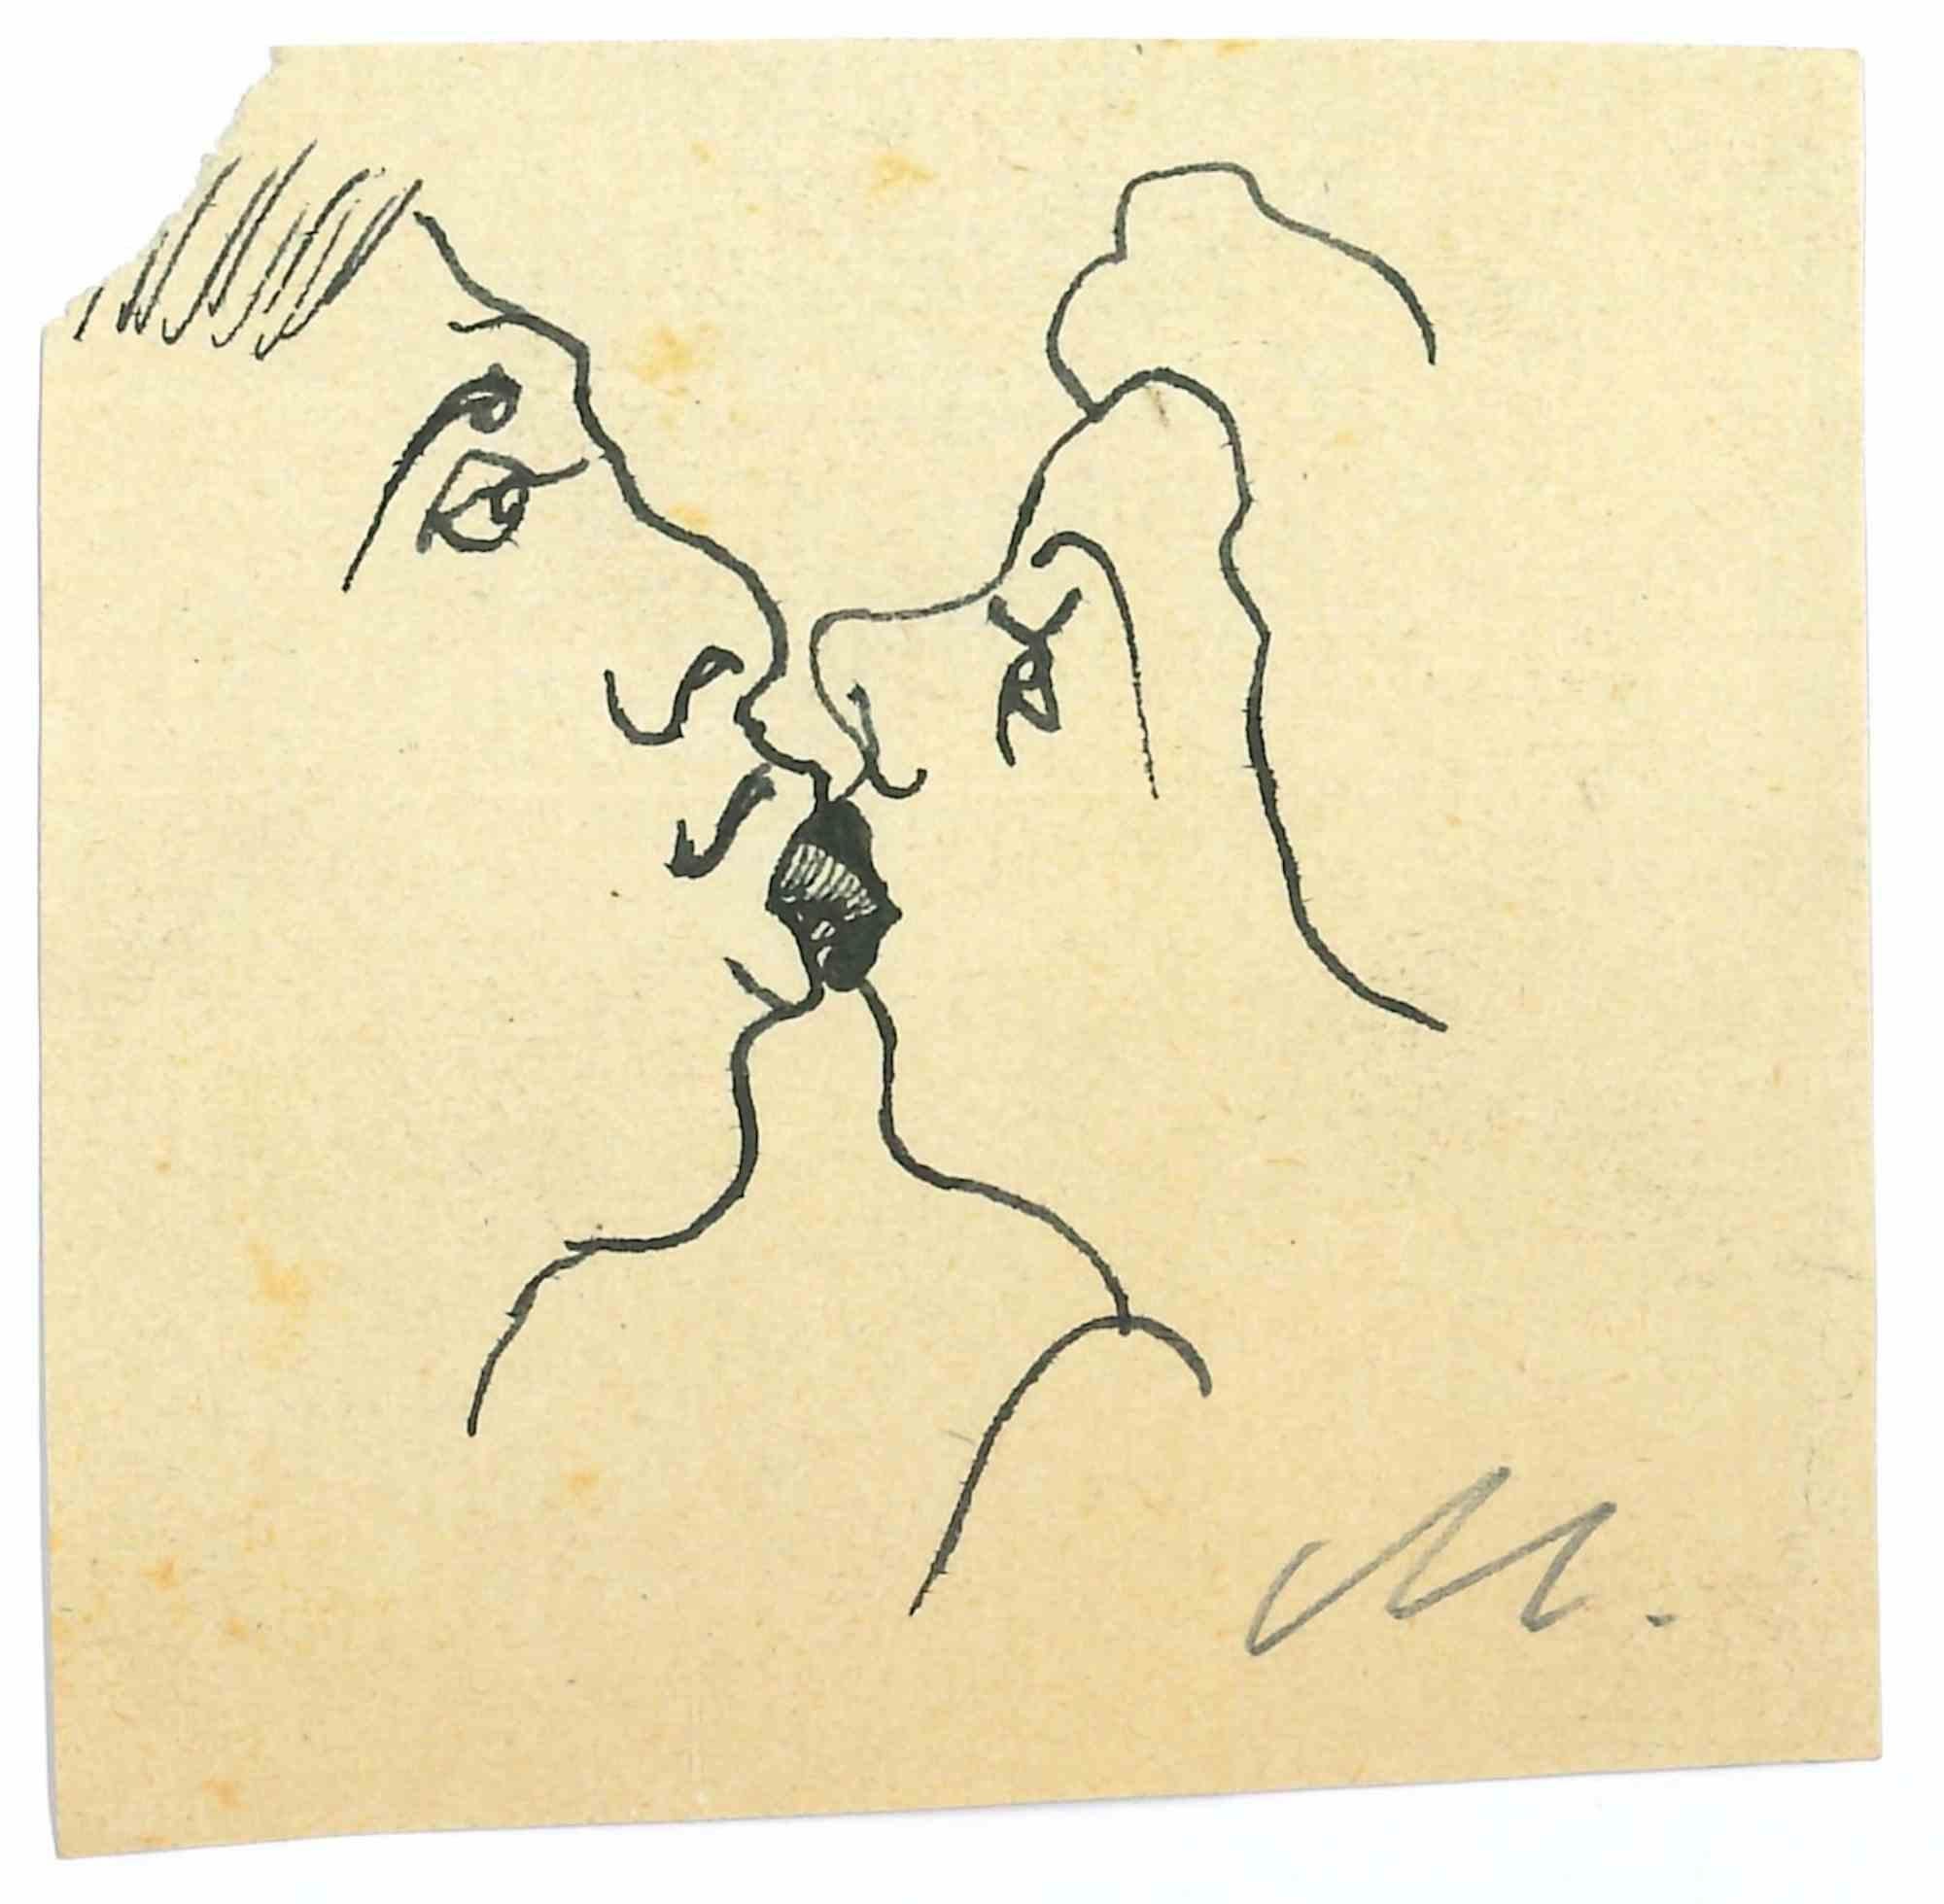 The Kiss is a China ink Drawing realized by Mino Maccari  (1924-1989) in the Mid-20th Century.

Hand-signed on the lower.

Good conditions.

Mino Maccari (Siena, 1924-Rome, June 16, 1989) was an Italian writer, painter, engraver and journalist,